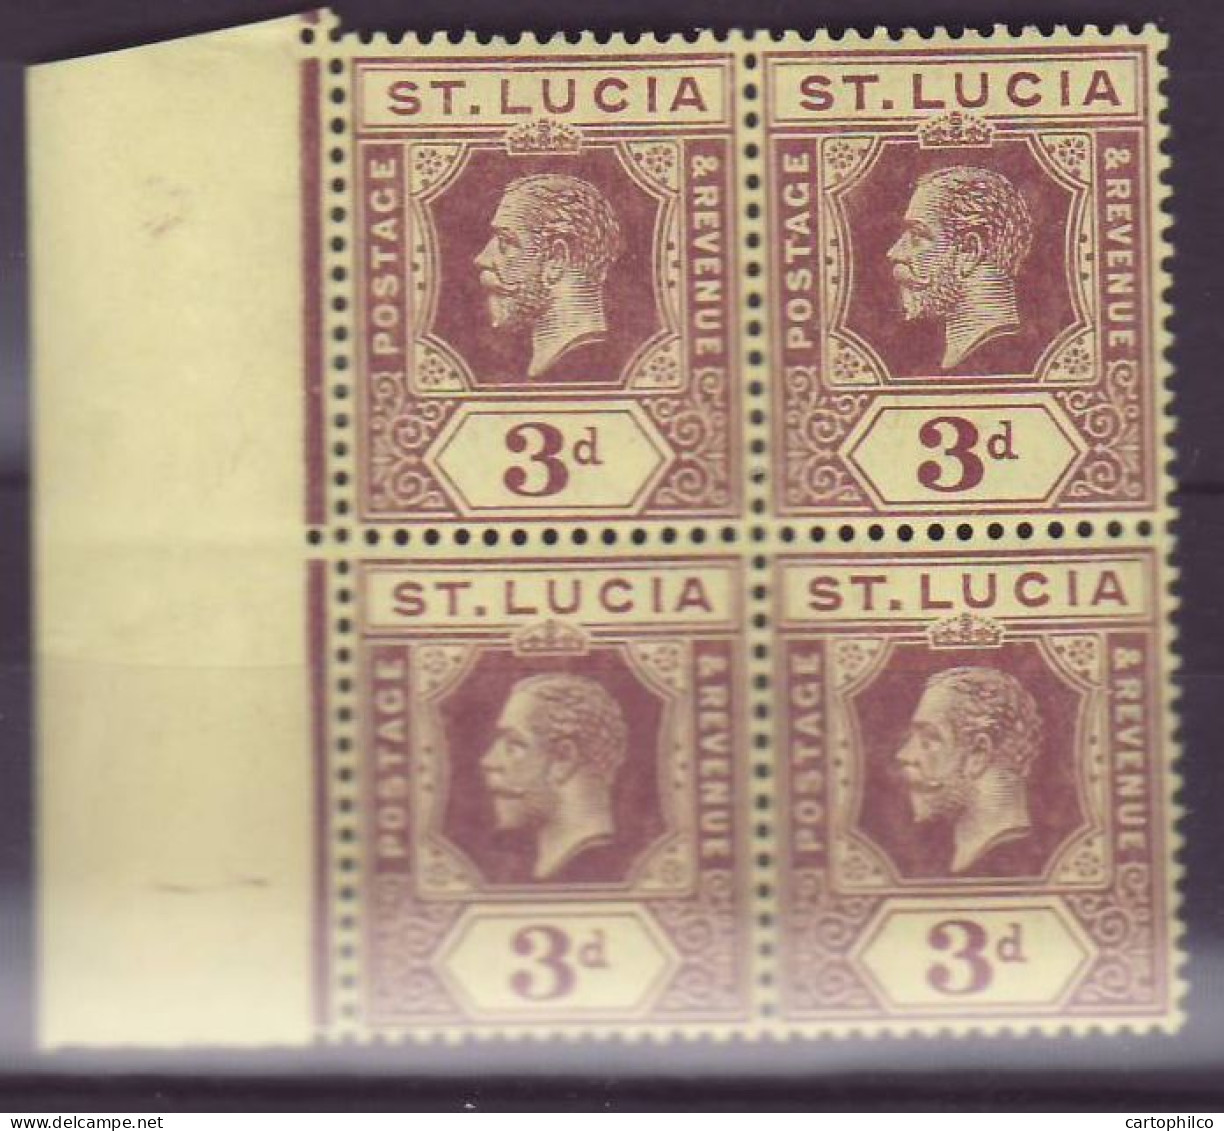 St Lucia SG82 Block Of 4 3d Mint Never Hinged (3 Stamps) - St.Lucia (...-1978)